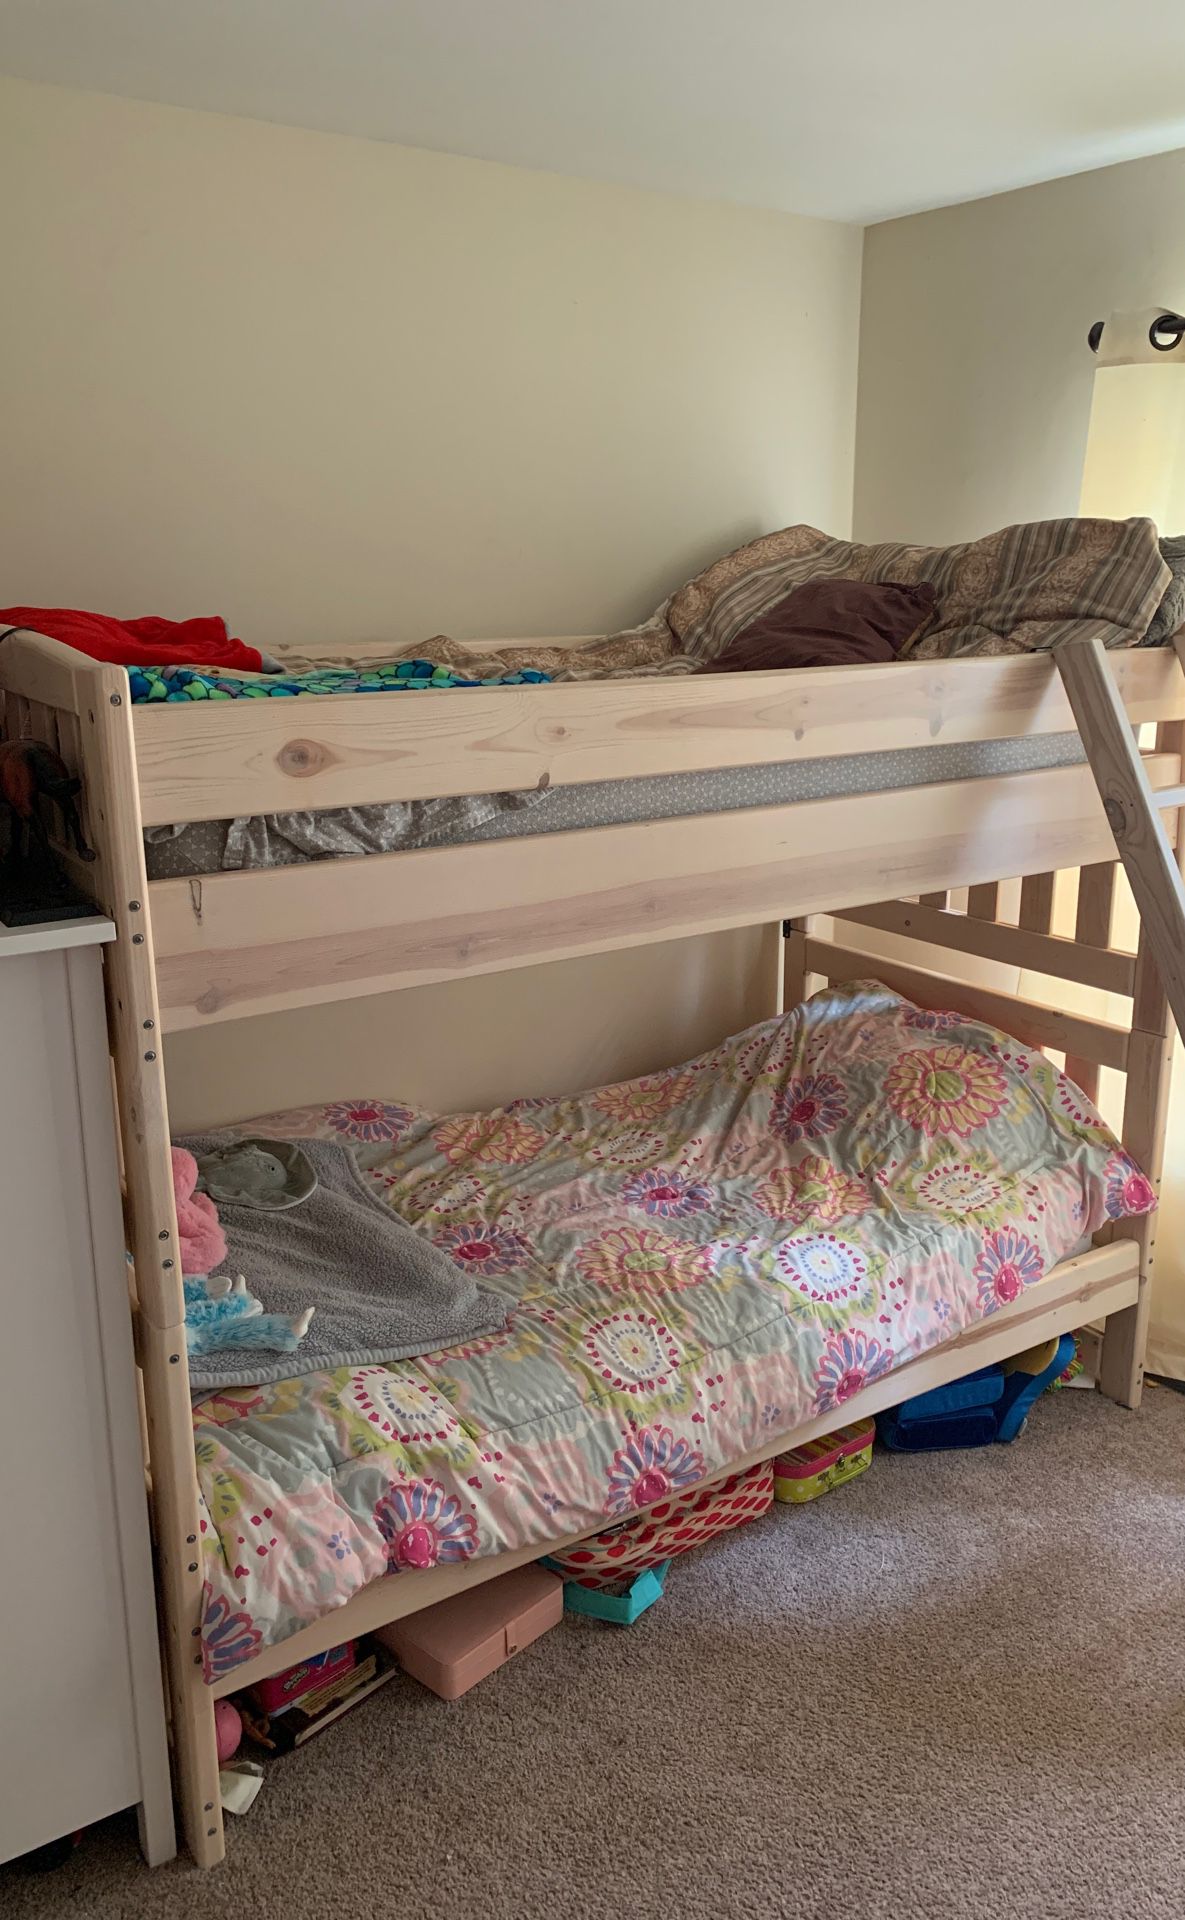 Havertys Bunkbed make an offer!! Excellent condition!